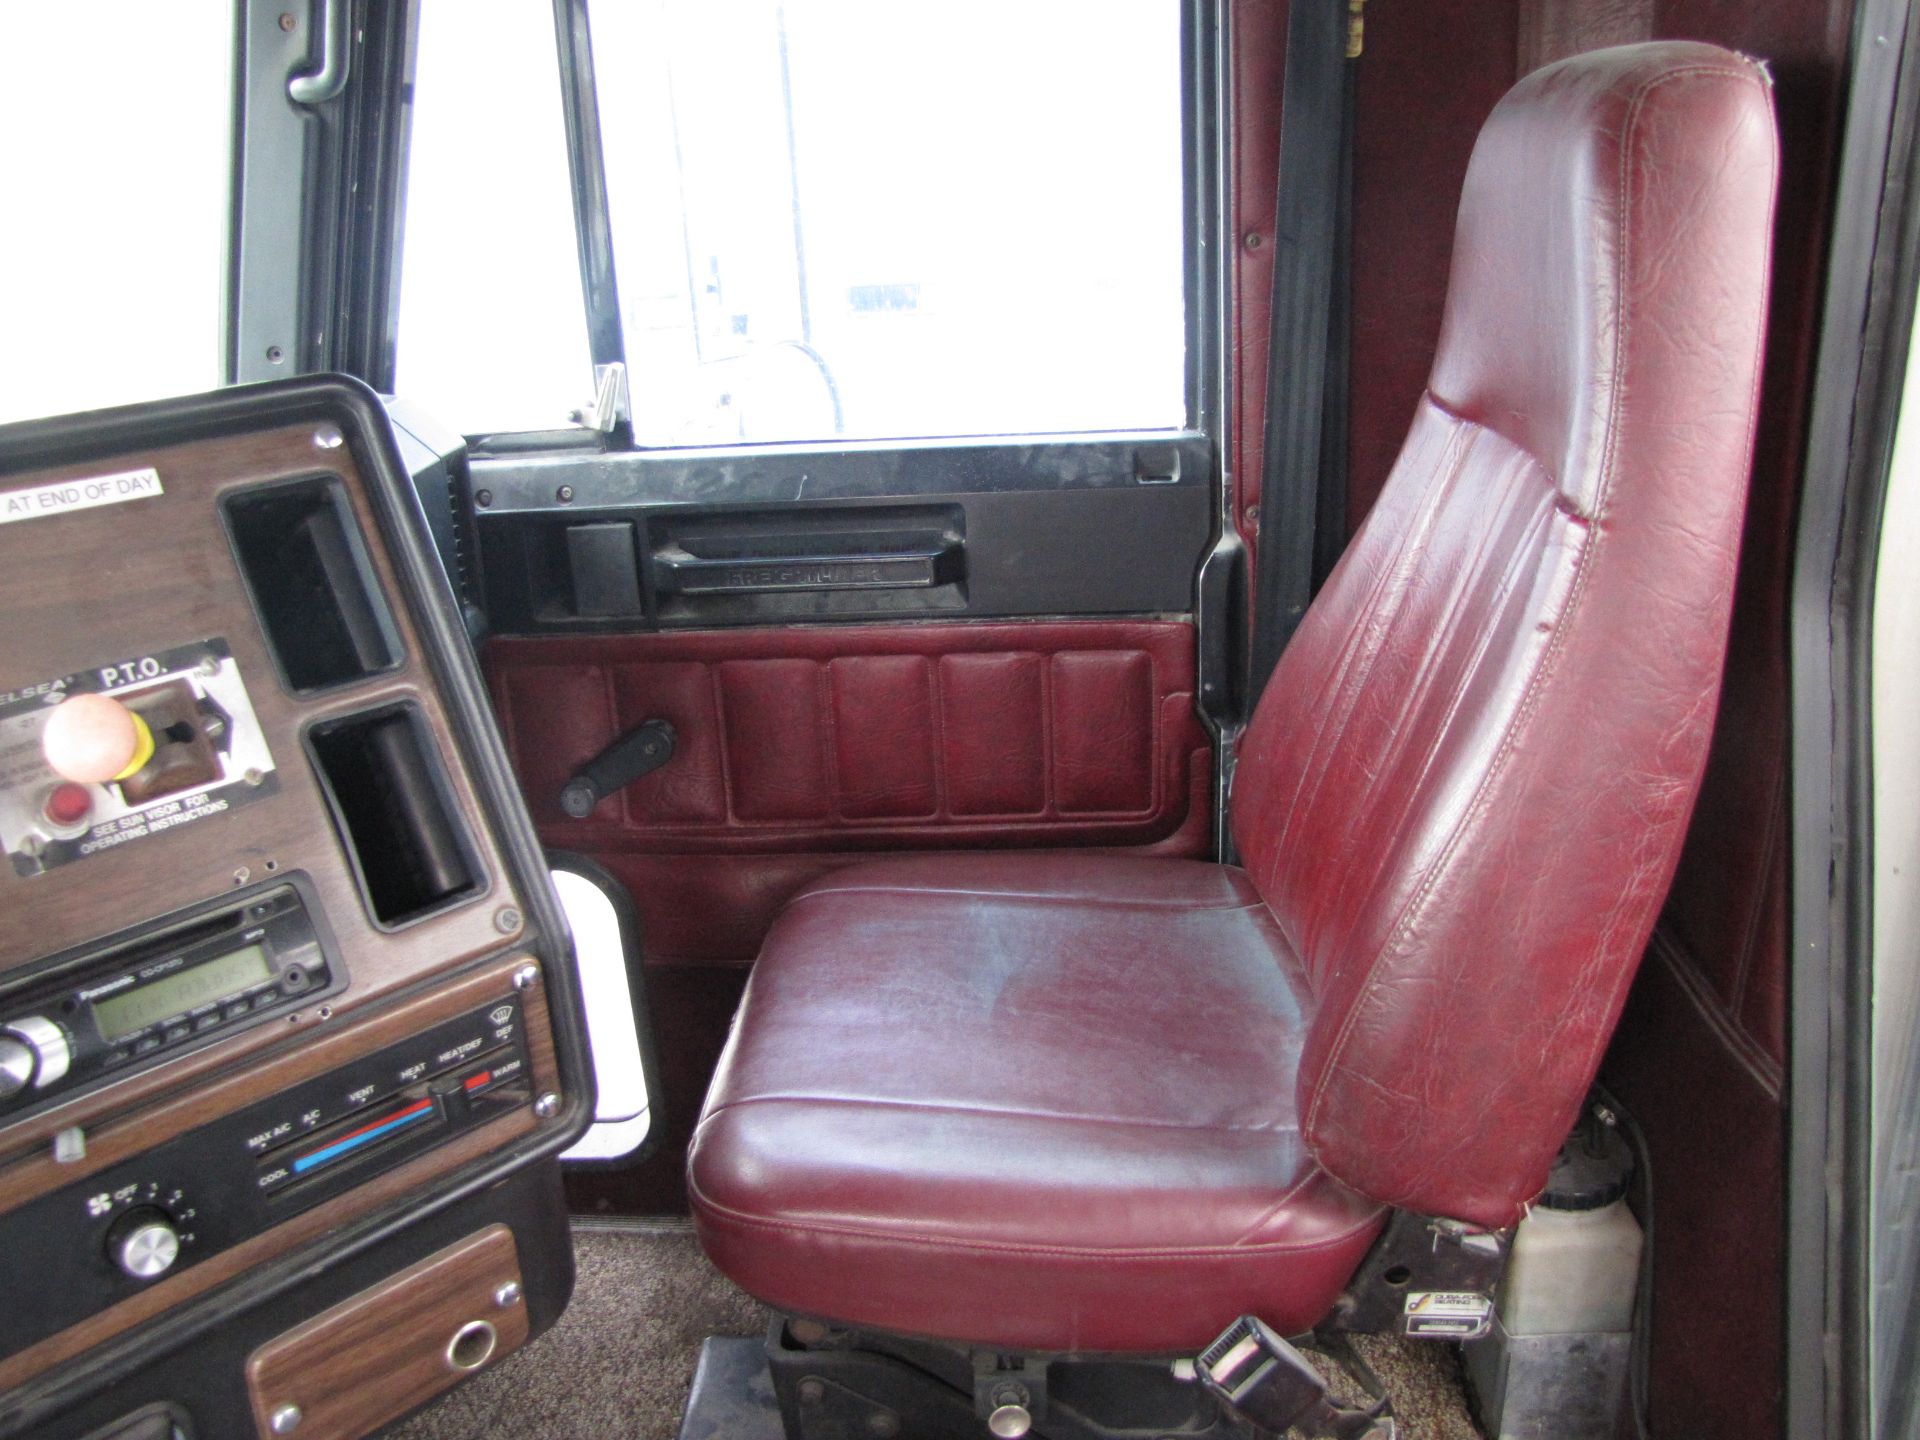 1993 Freightliner FLD120 semi truck - Image 63 of 71